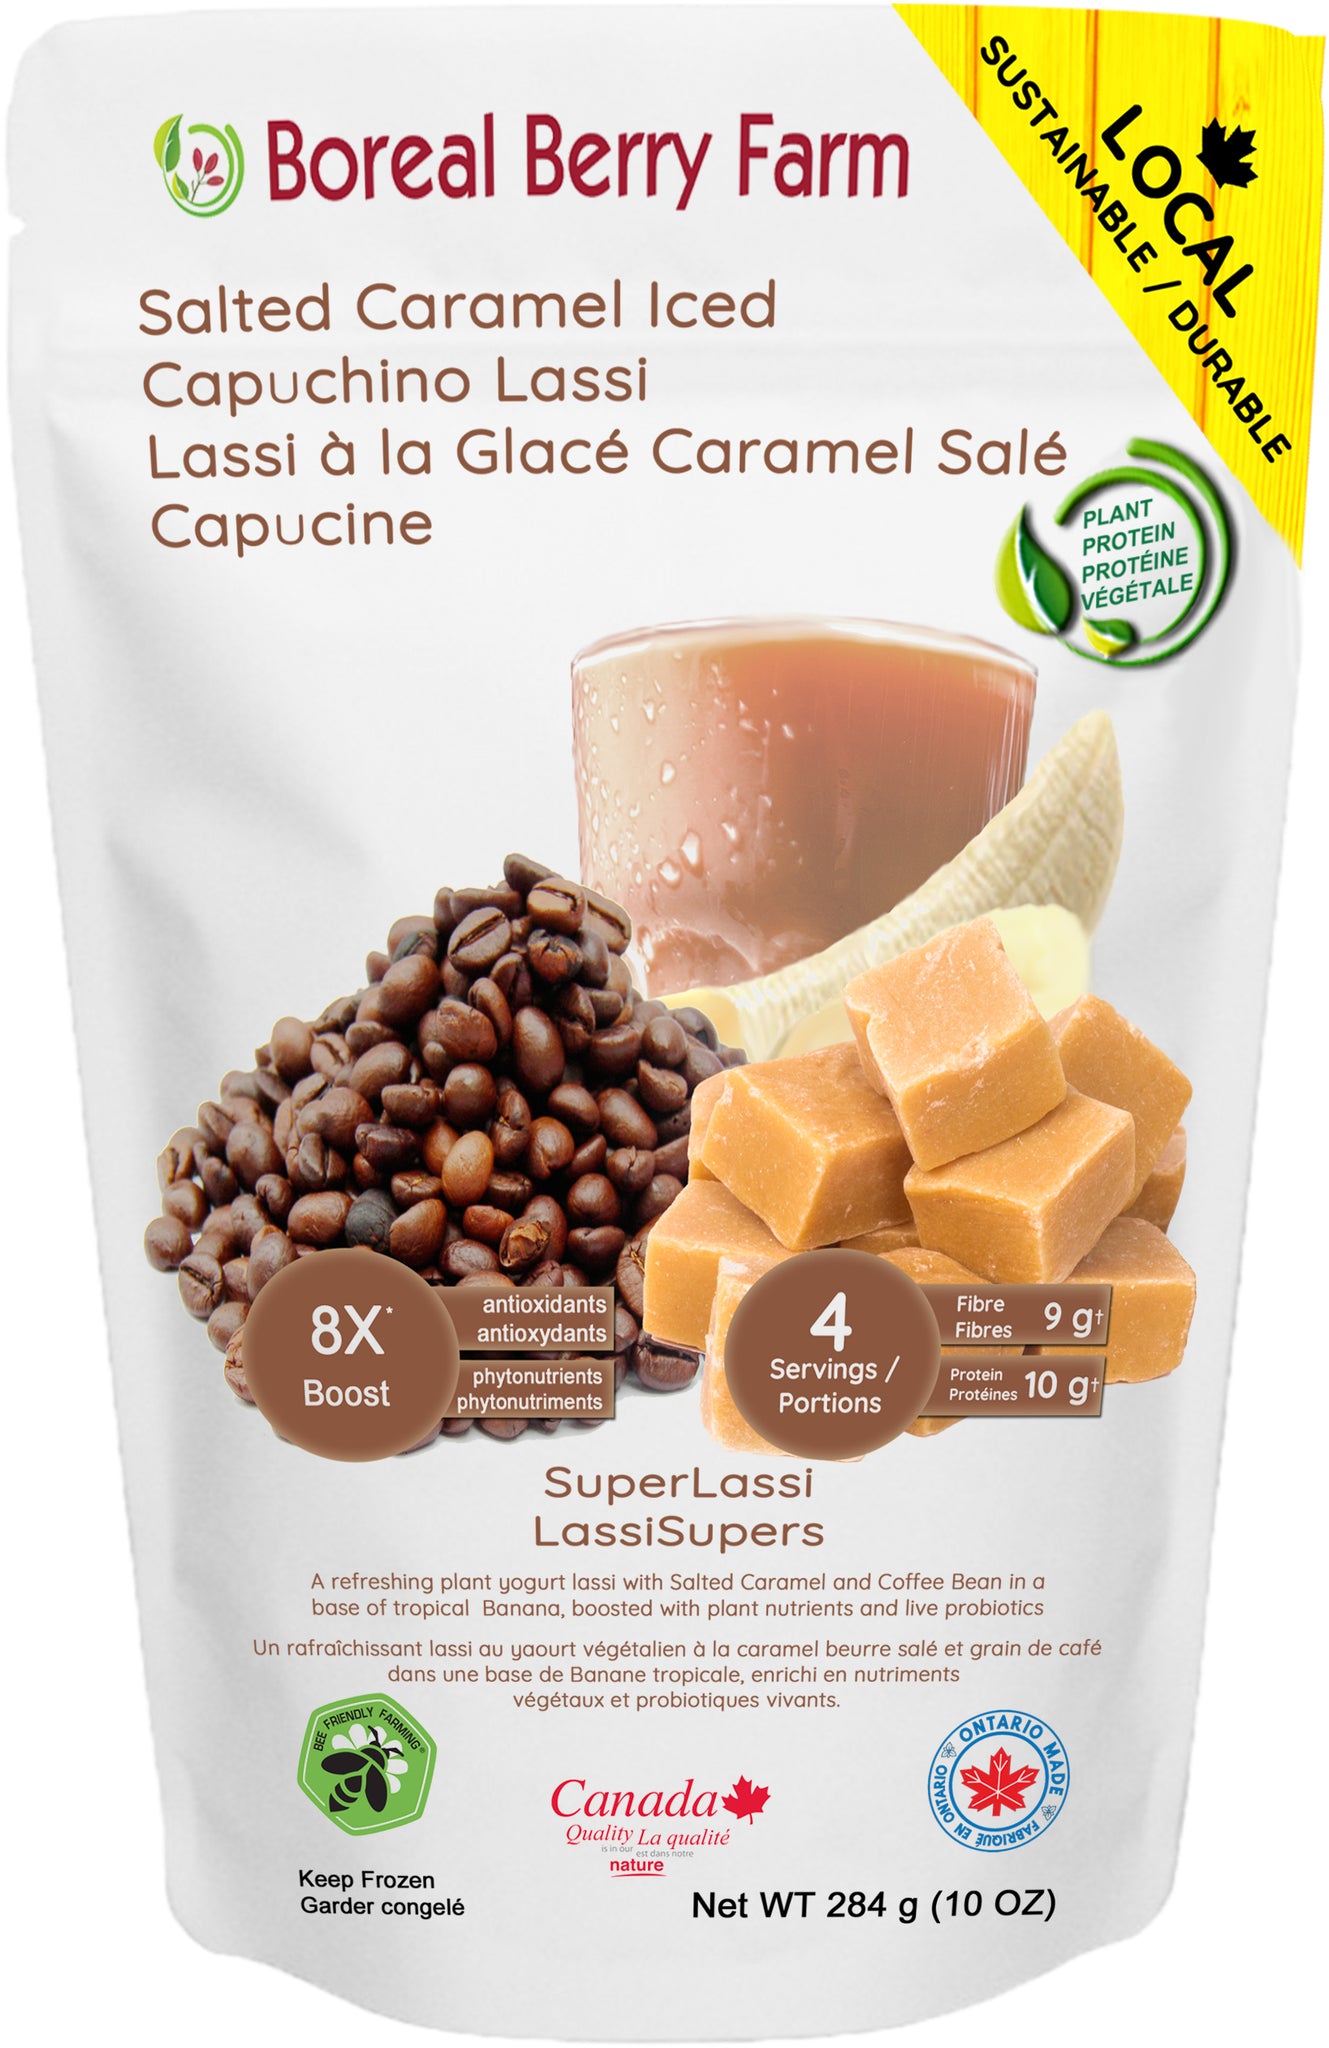 PowerFruit™ Salted Caramel Iced Cappuccino Super Lassi - Value Case of 6